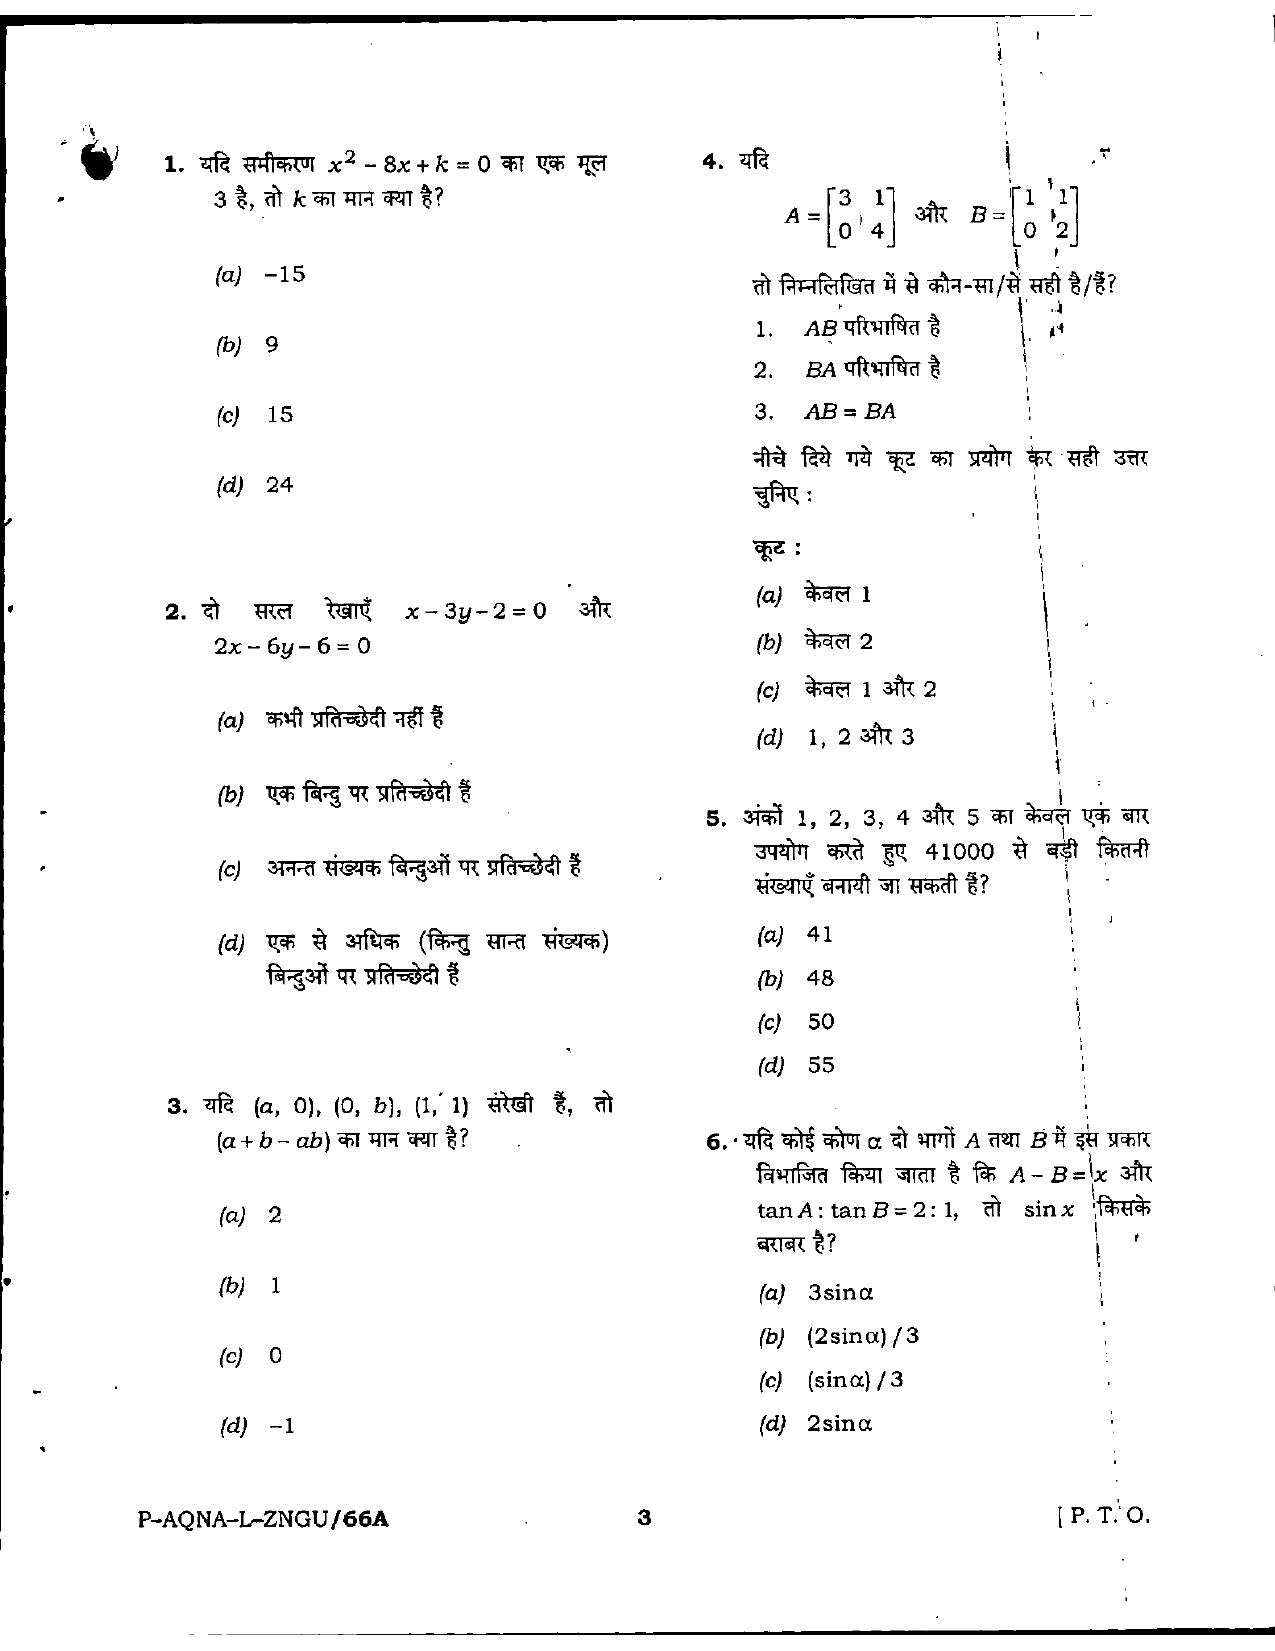 Jammu Kashmir Accounts Assistant Previous Papers for Mathematics - Page 3